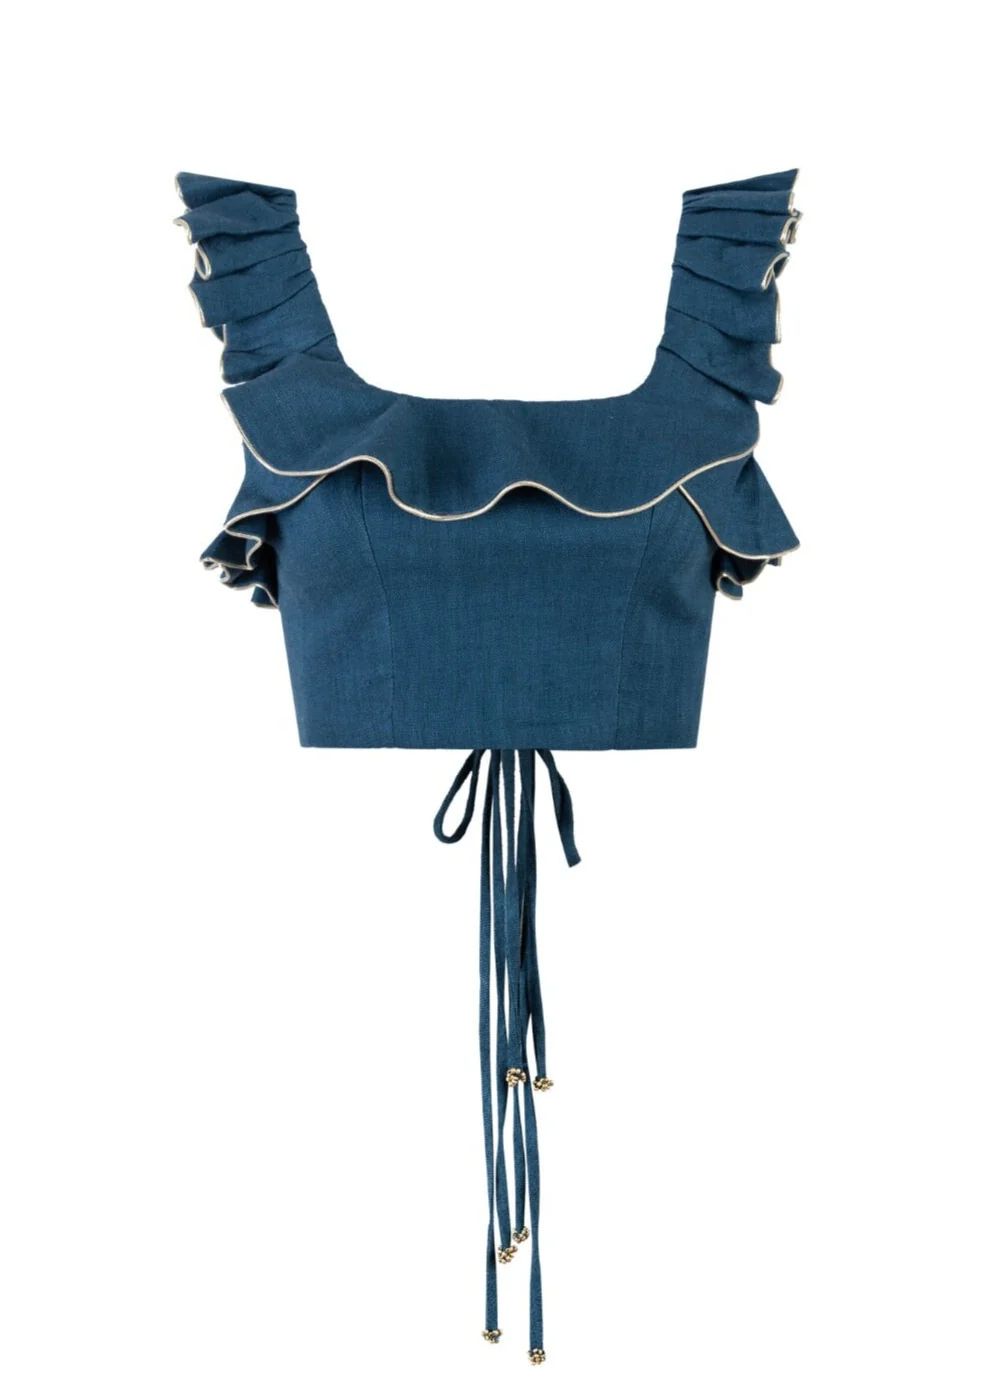 Malika Bustier Top in Blue | Over The Moon